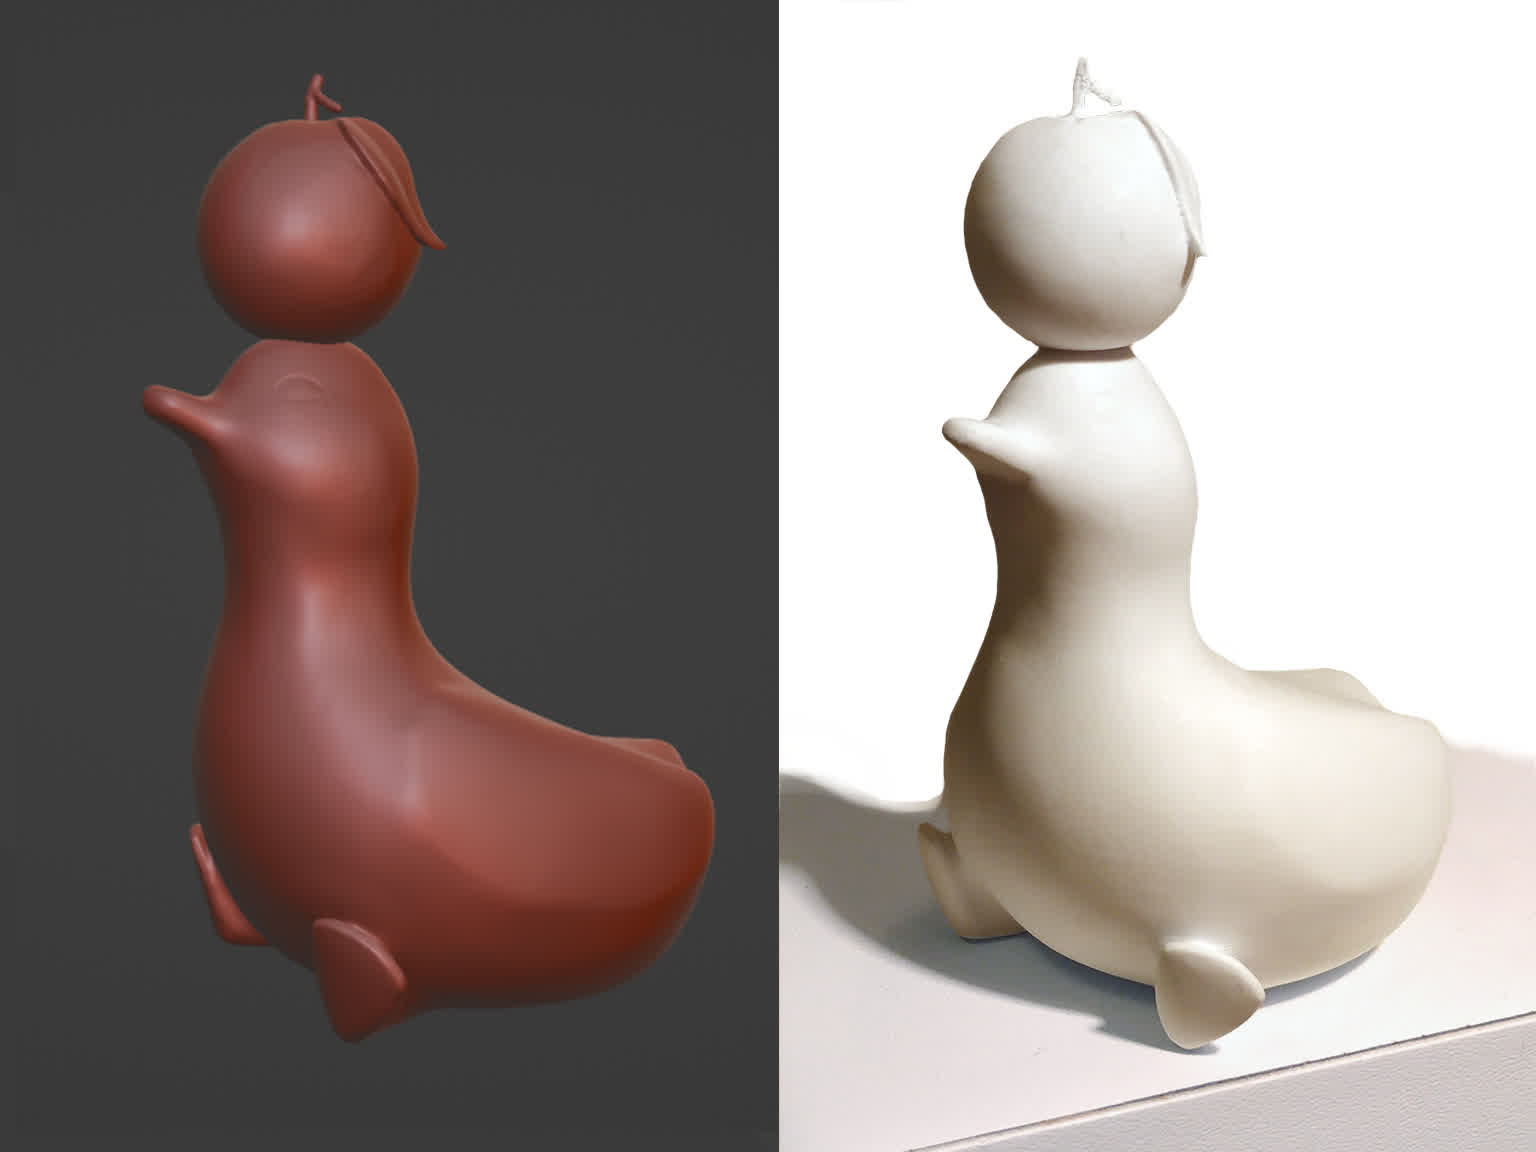 sculpted model of a duck in blender on the left, and the same model 3D printed and sanded smooth on the right